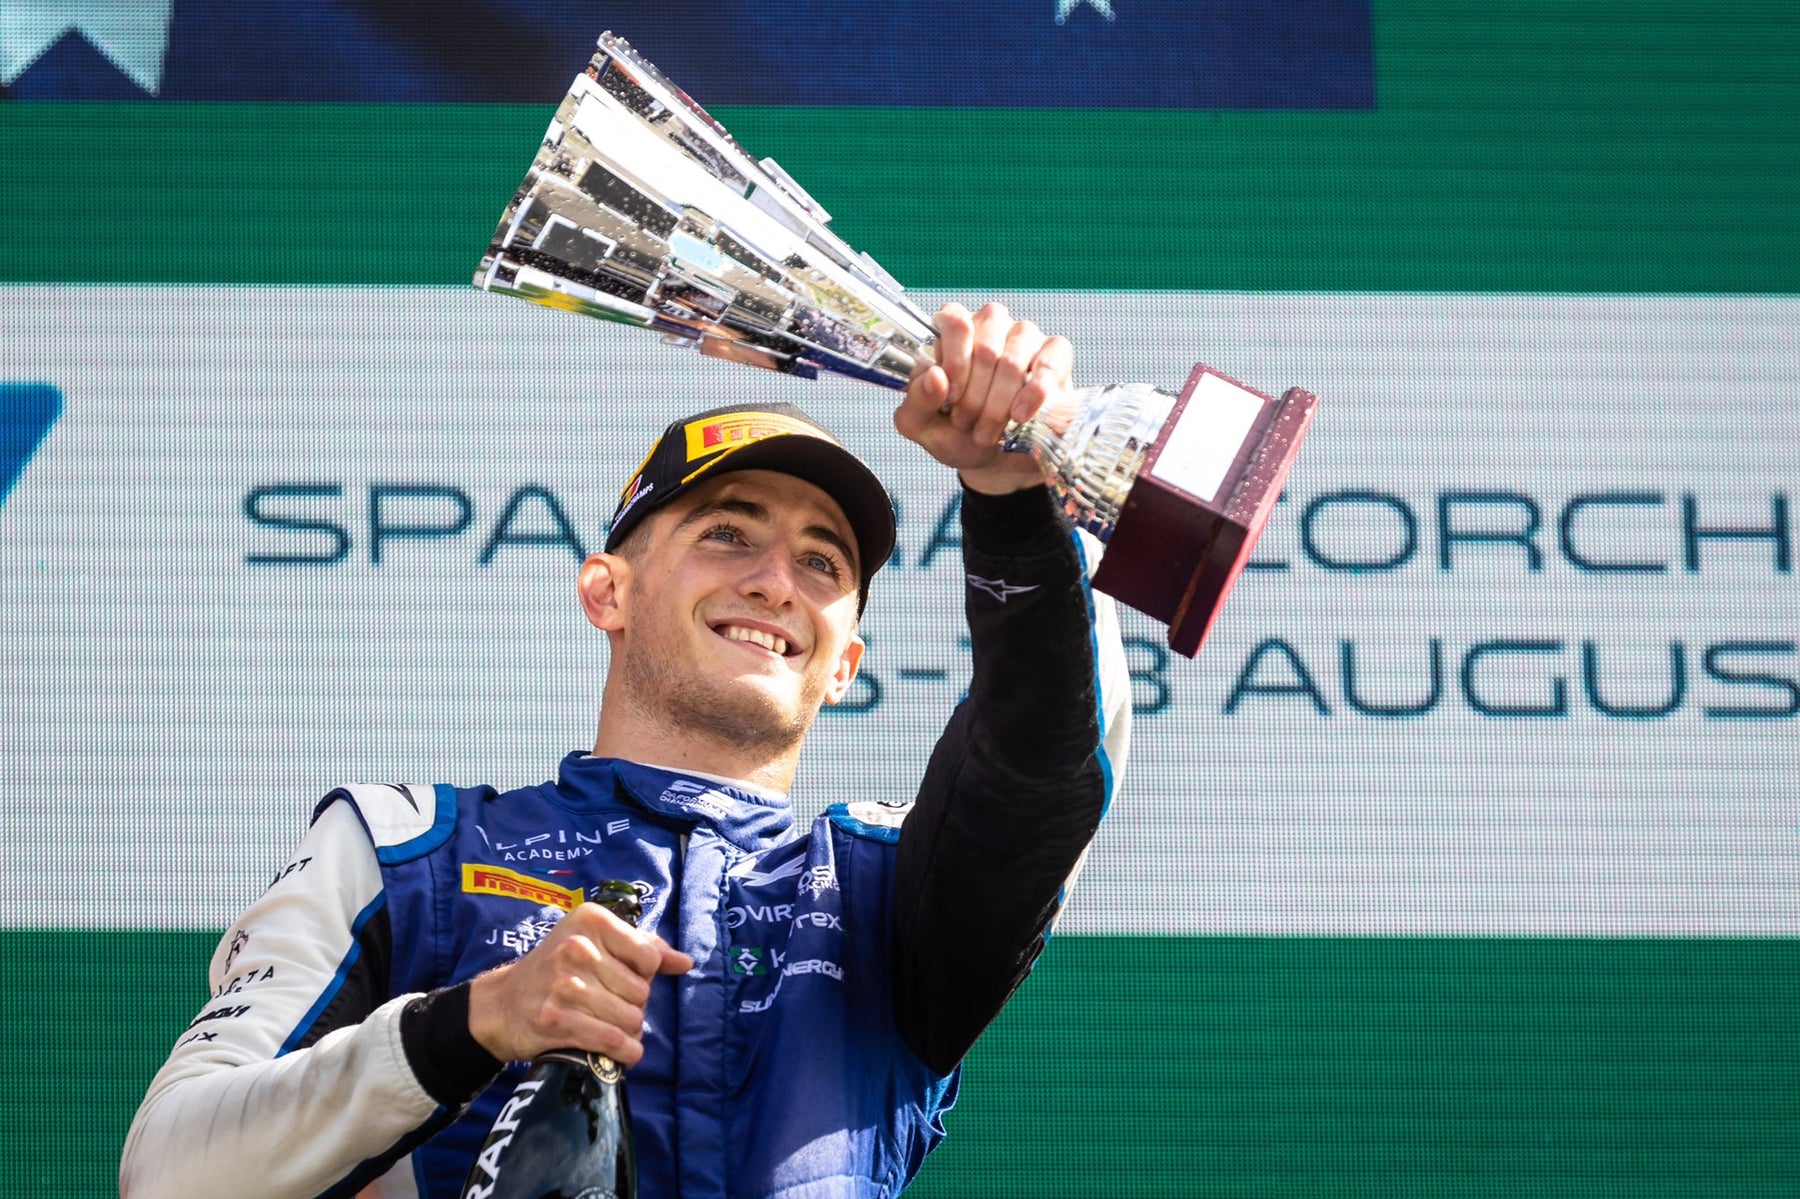 SERIES ROOKIE JACK DOOHAN SEALS F2 FEATURE RACE VICTORY IN NEAR-PERFECT WEEKEND AFTER SECOND PLACE FINISH IN THE SPRINT RACE AT SPA-FRANCORCHAMPS